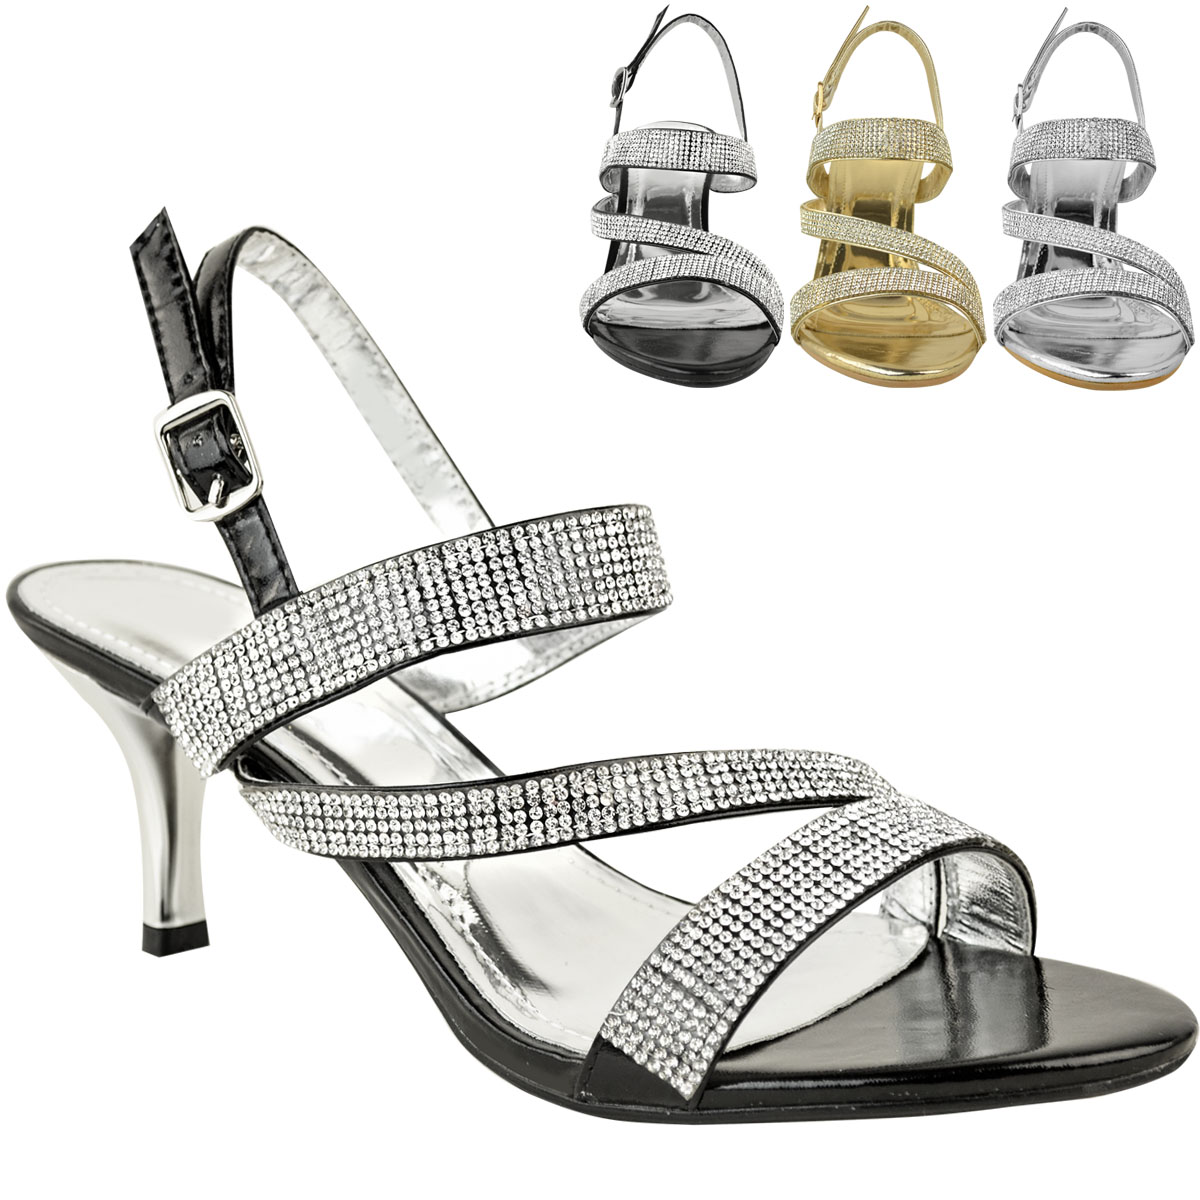 Ladies Diamante Mid Heel Sandals Womens T bar Strappy Shoes Evening Party size 